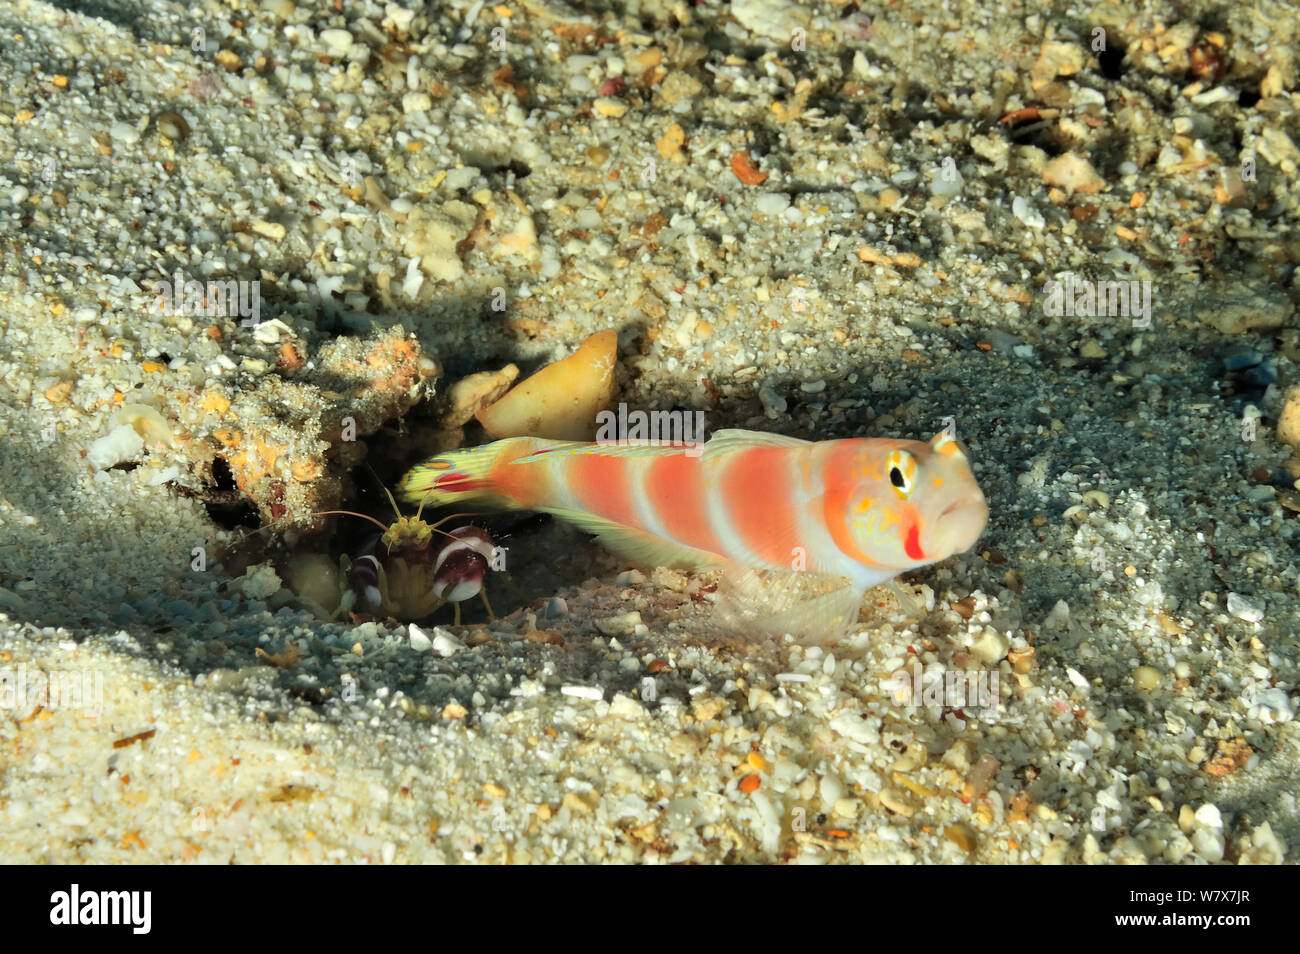 Red-banded shrimp (Alpheus randalli) and Pinkbar goby (Amblyeleotris aurora) symbiotic pair with goby protecting shrimp as it digs.  Maldives. Indian Ocean. Stock Photo